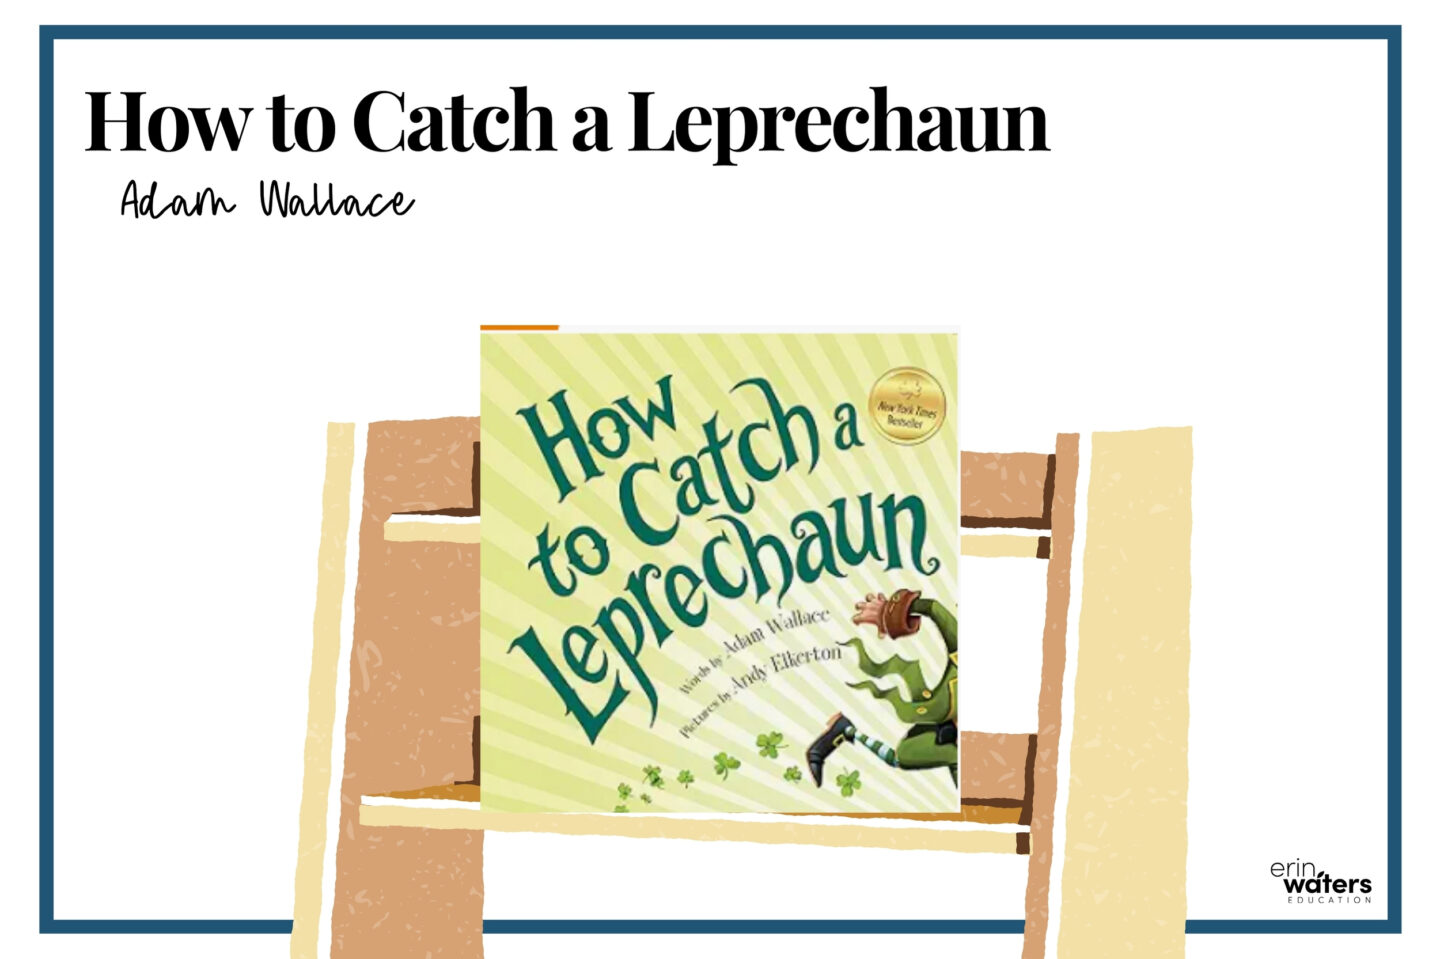 st. patrick's day books blog post image depicting the cover image of "How to Catch a Leprechaun" on a bookshelf